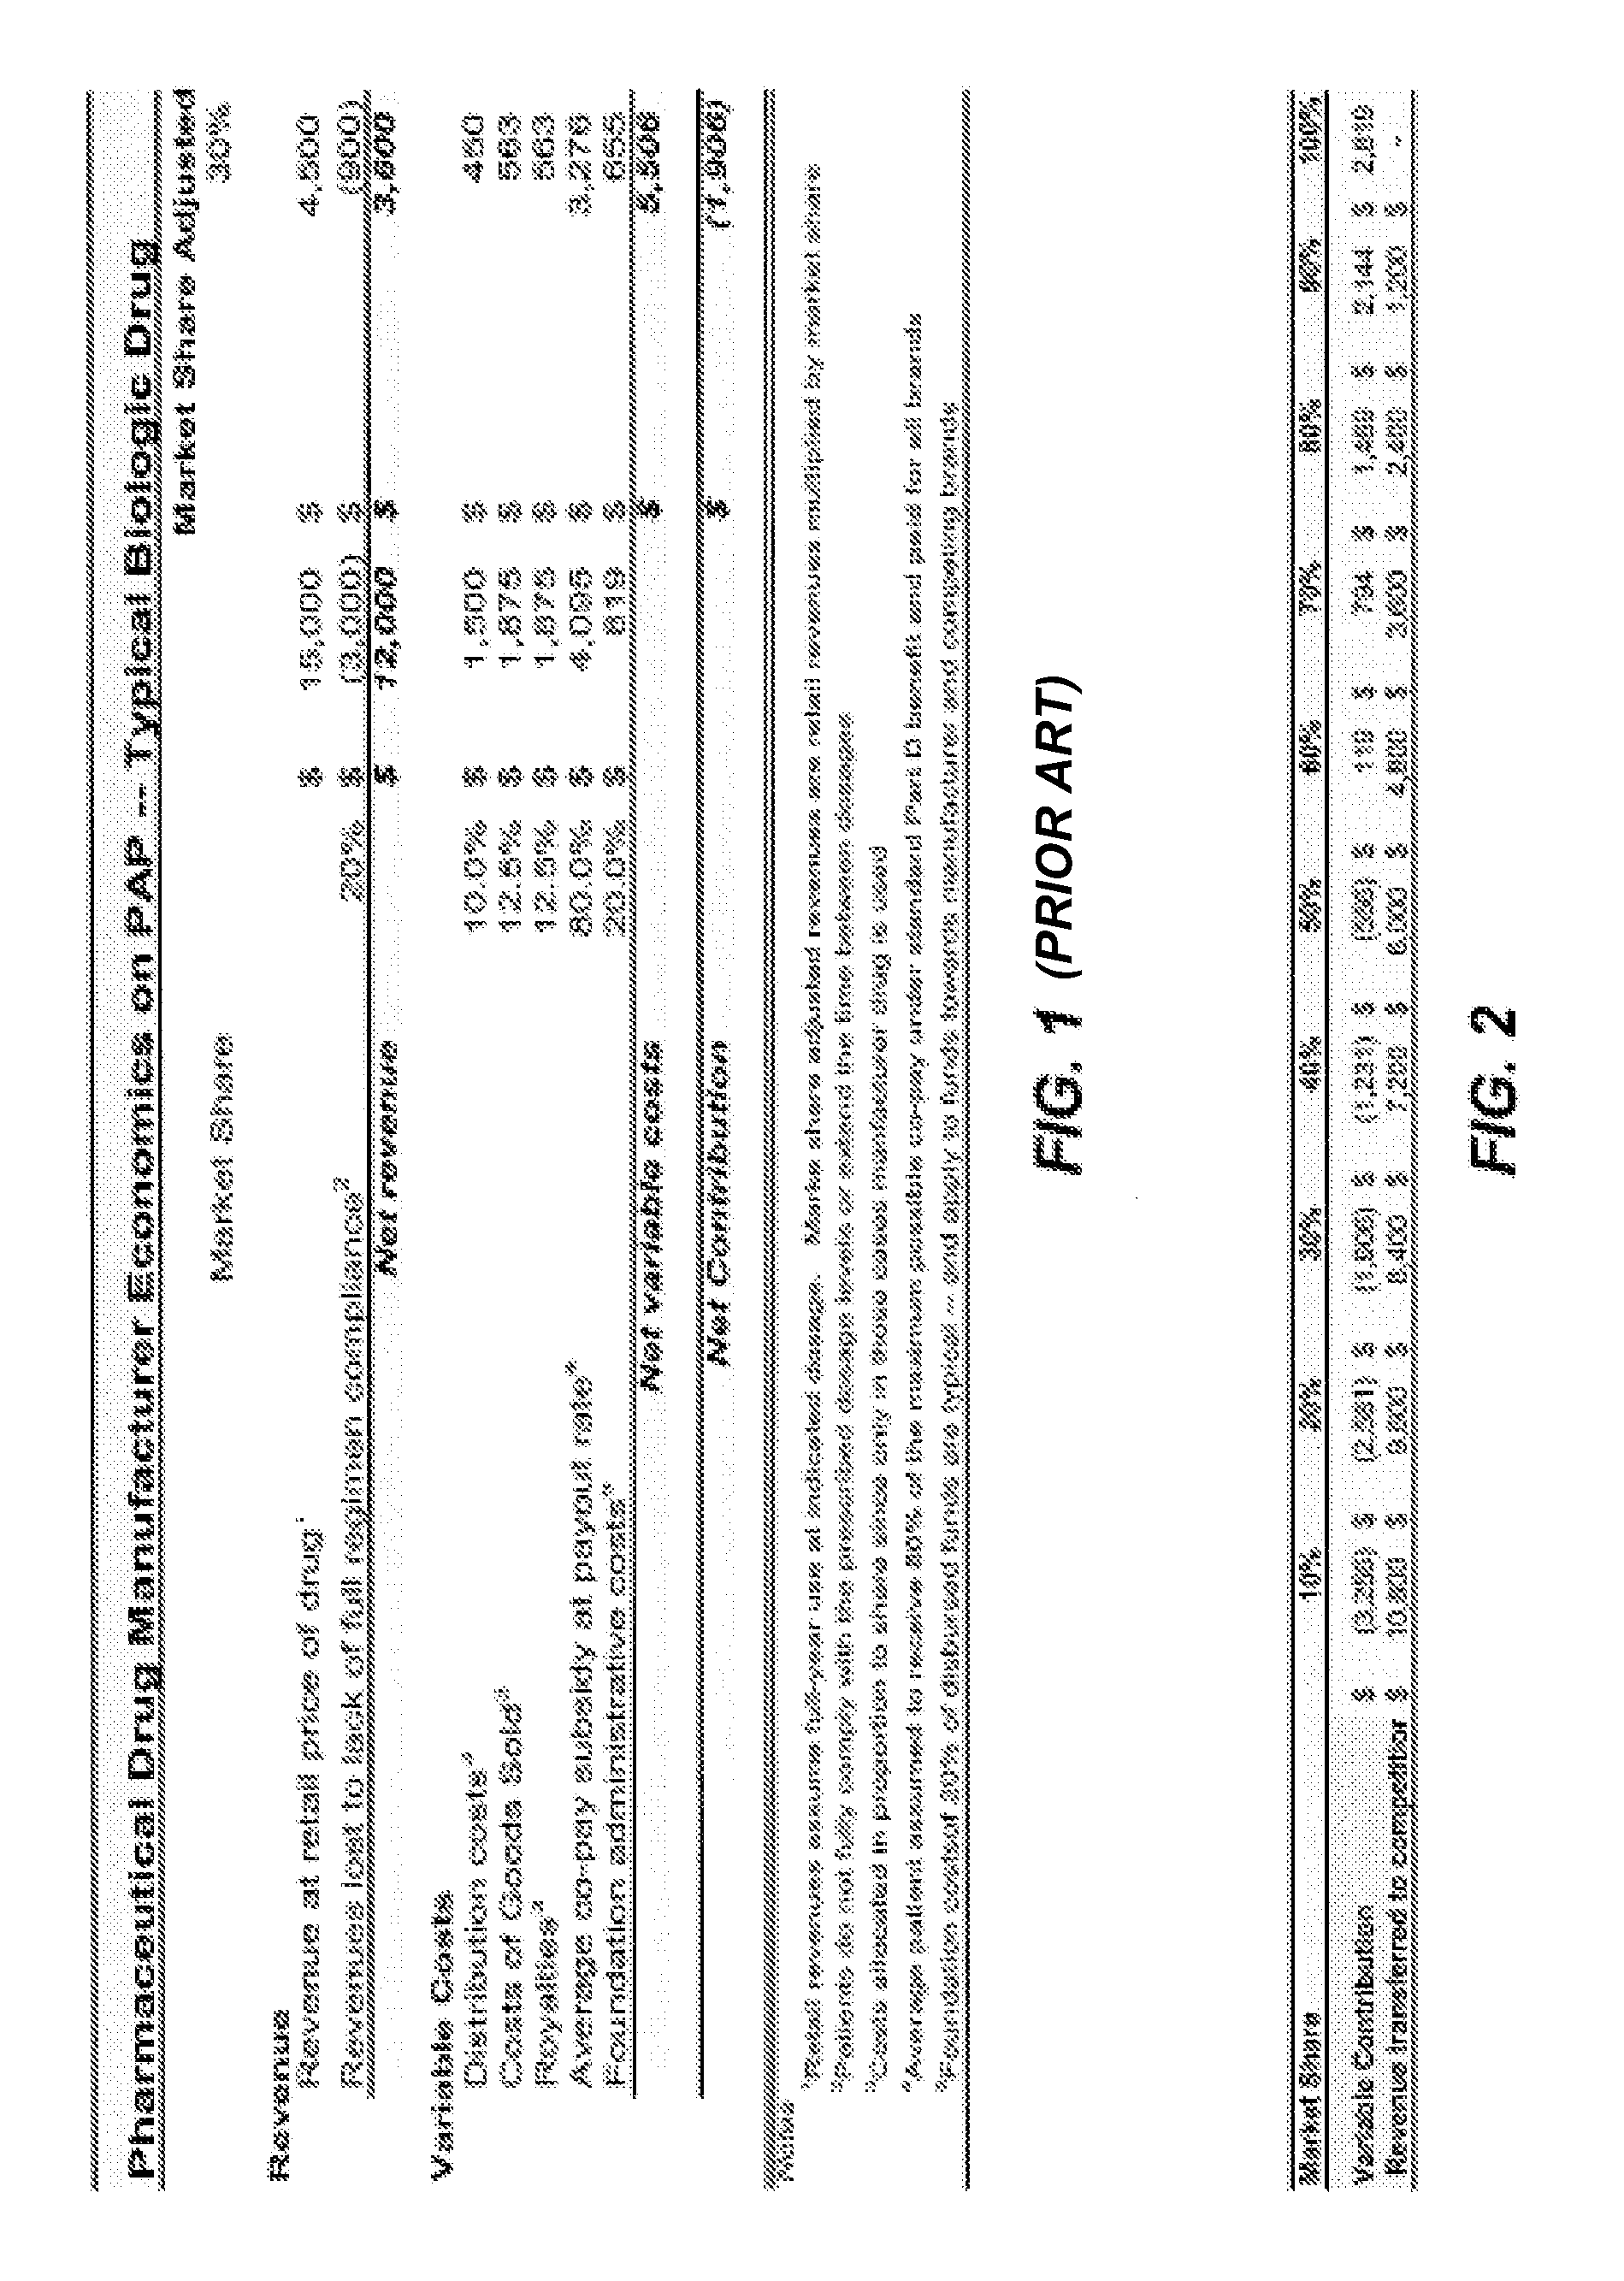 Pharmaceutical clearinghouse method and system